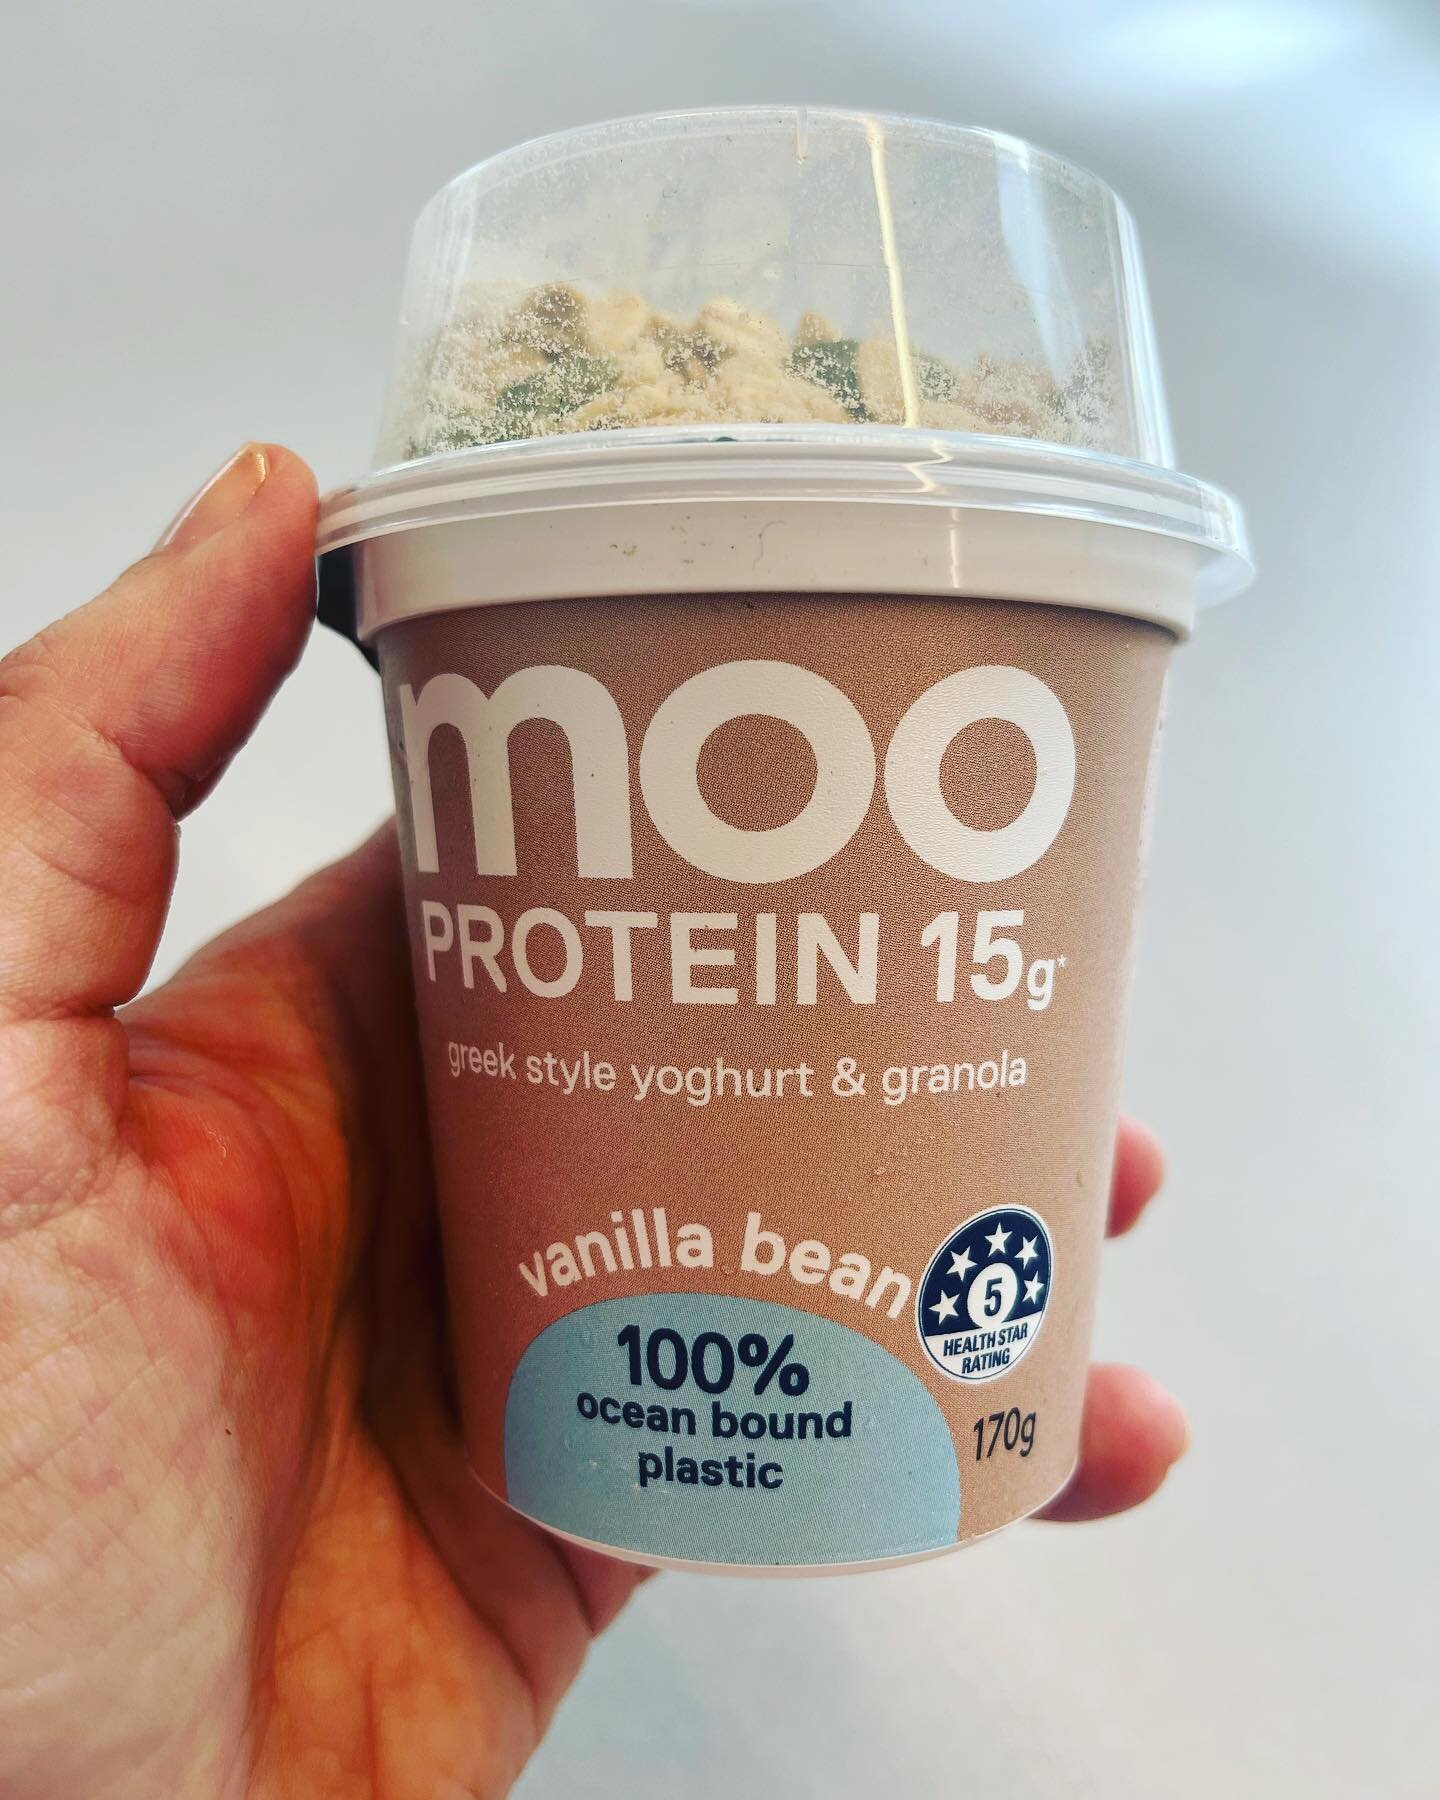 Moo High Protein Greek Style Yoghurt

Looking for an on-the-go snack that is convenient, filling and nutritious? You should consider the new range from Moo - portable high protein yoghurt and granola cups

Why they are great:

🥛 The yoghurt pots com